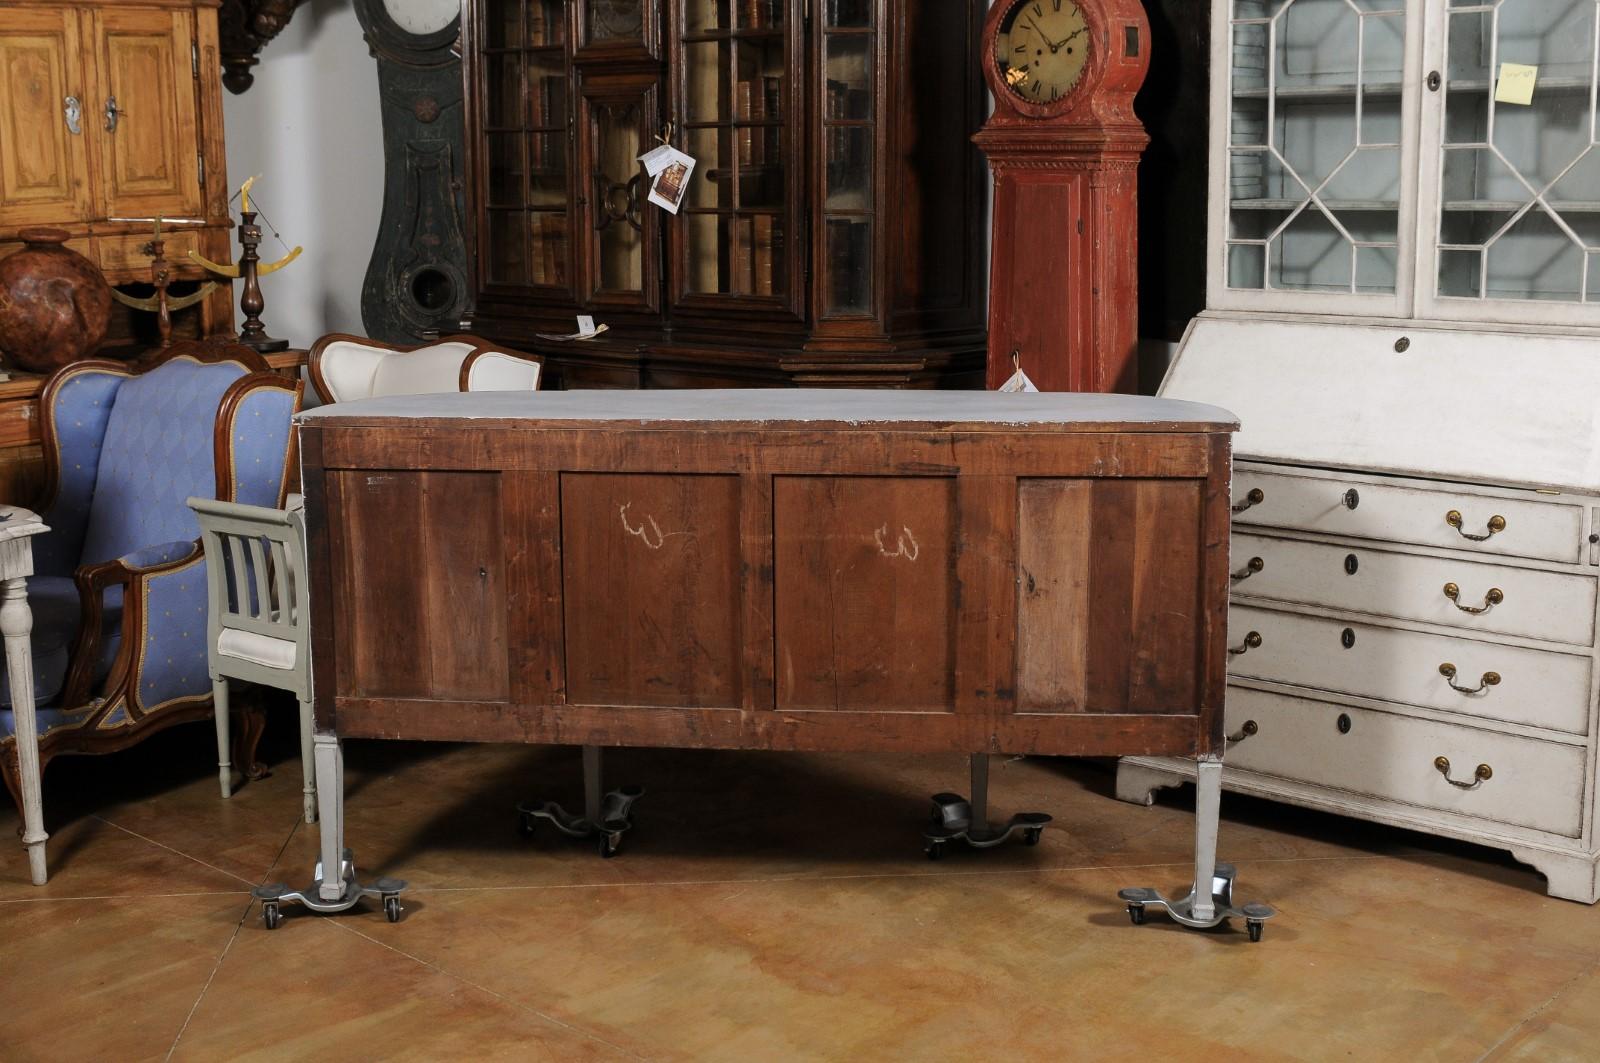 European 1830s Painted Demilune Sideboard with Three Drawers and Rounded Doors In Good Condition For Sale In Atlanta, GA